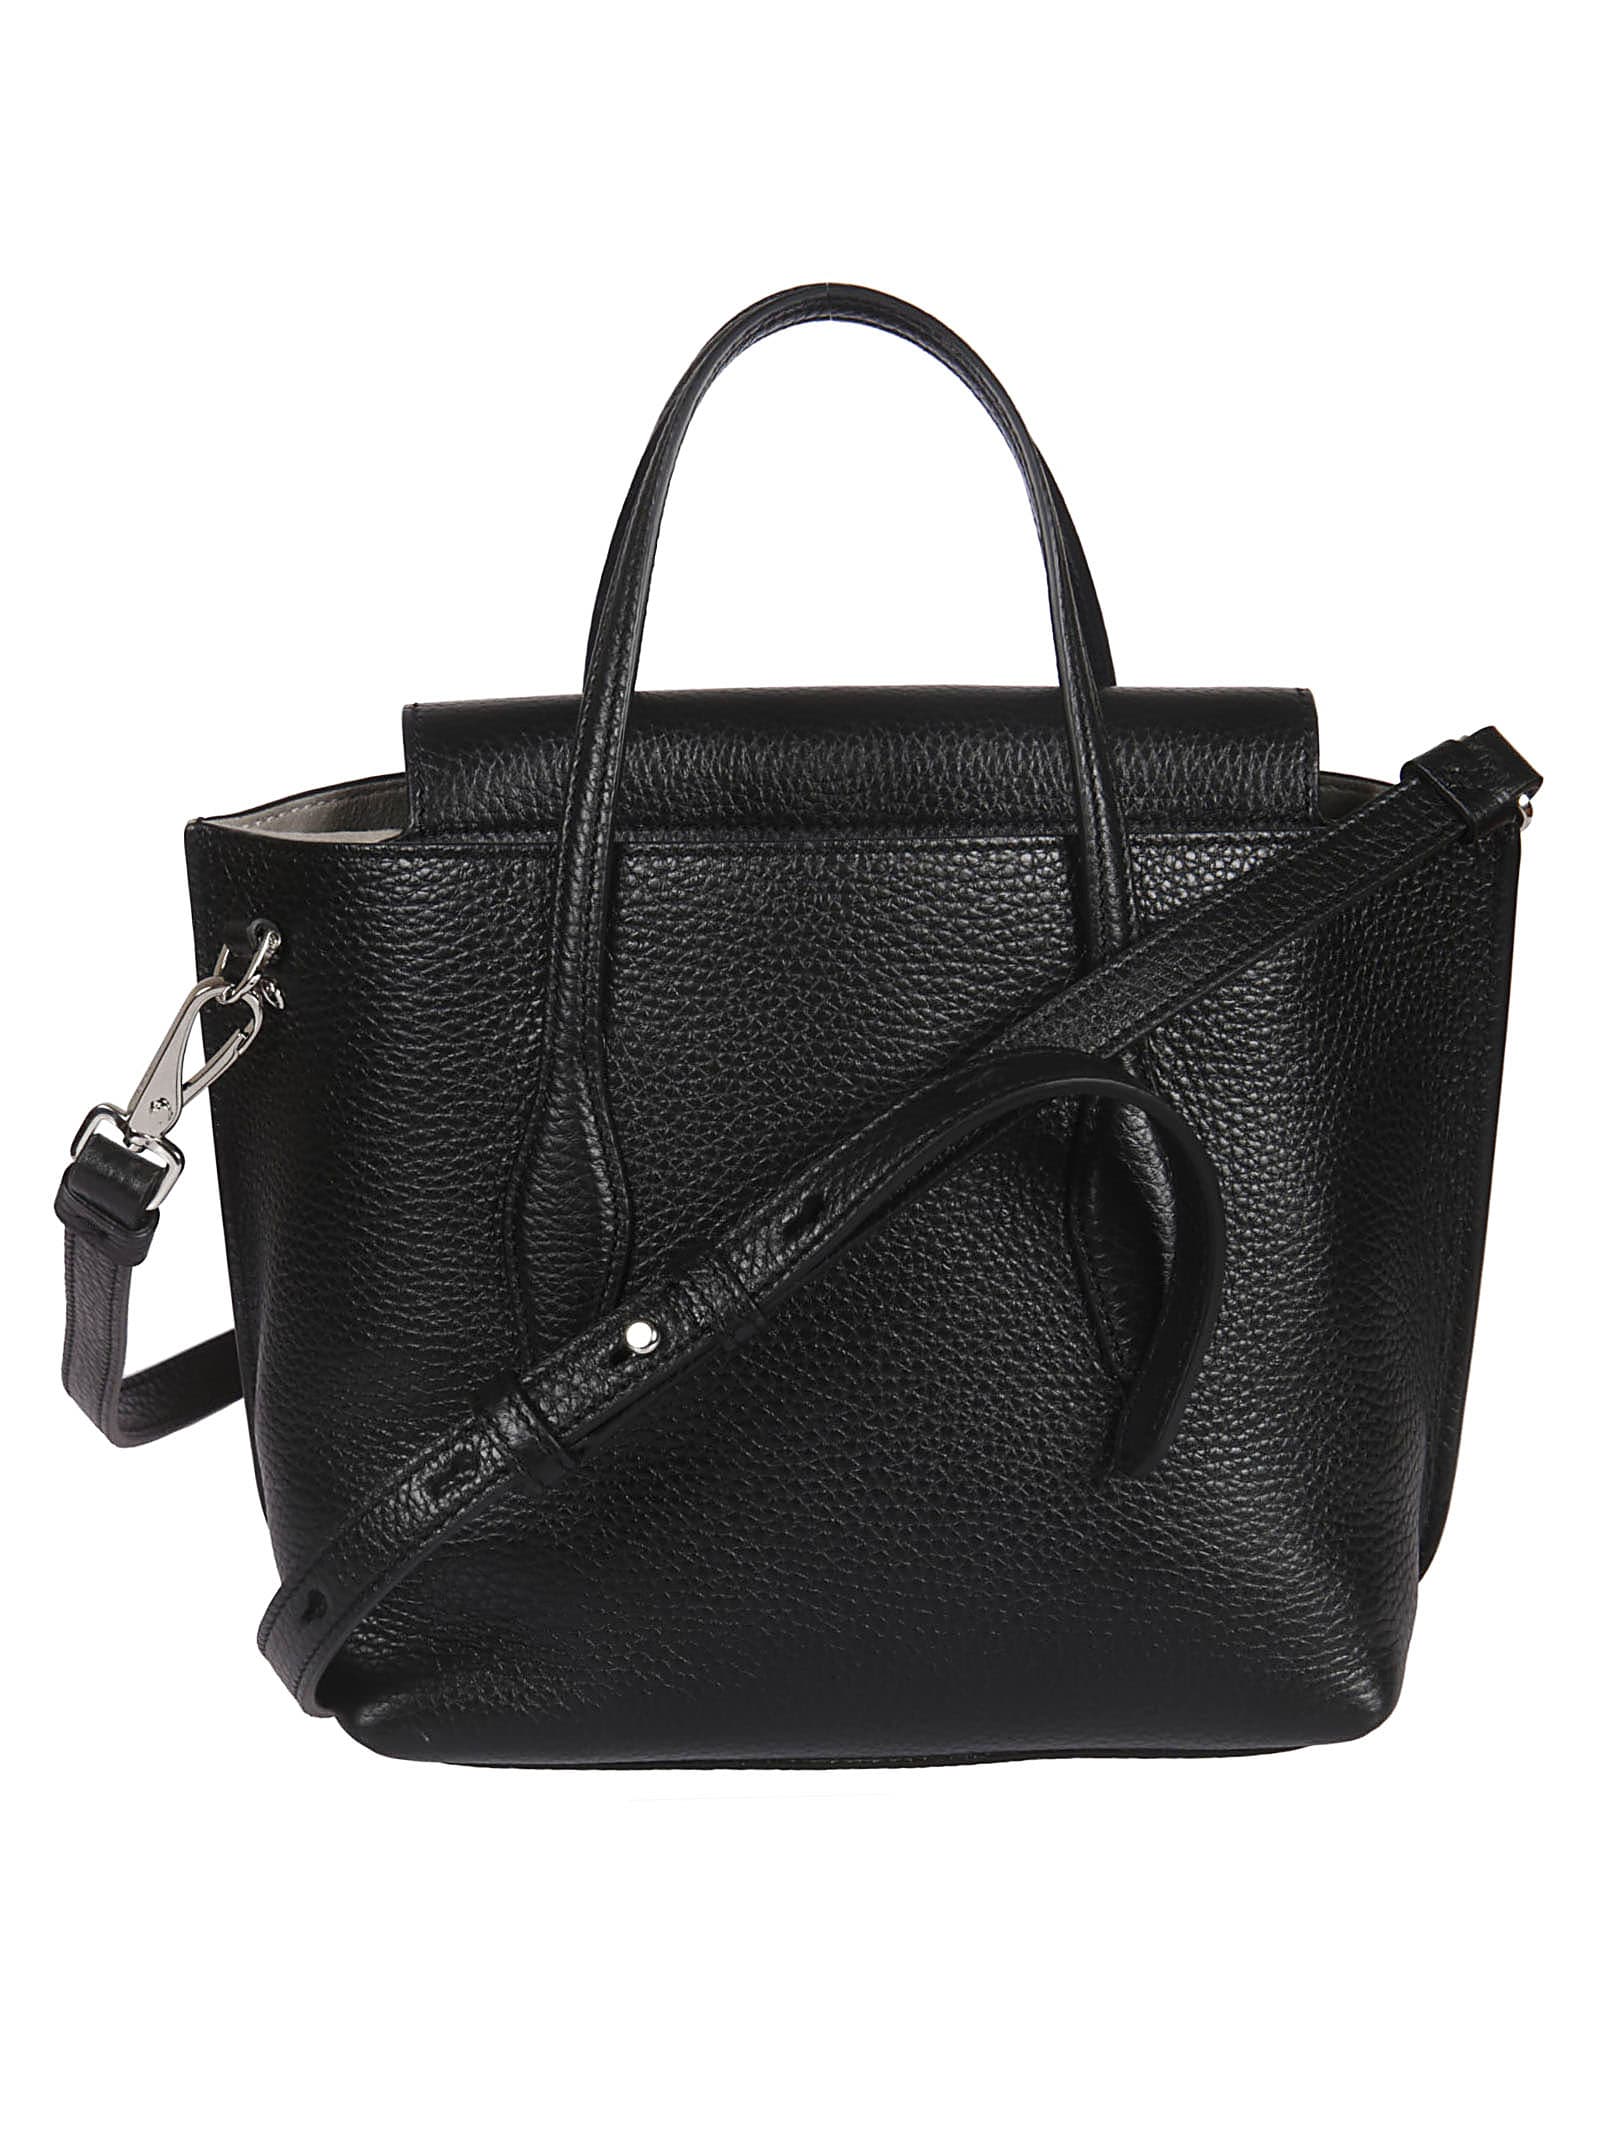 Tod's Shoulder Bags | italist, ALWAYS LIKE A SALE